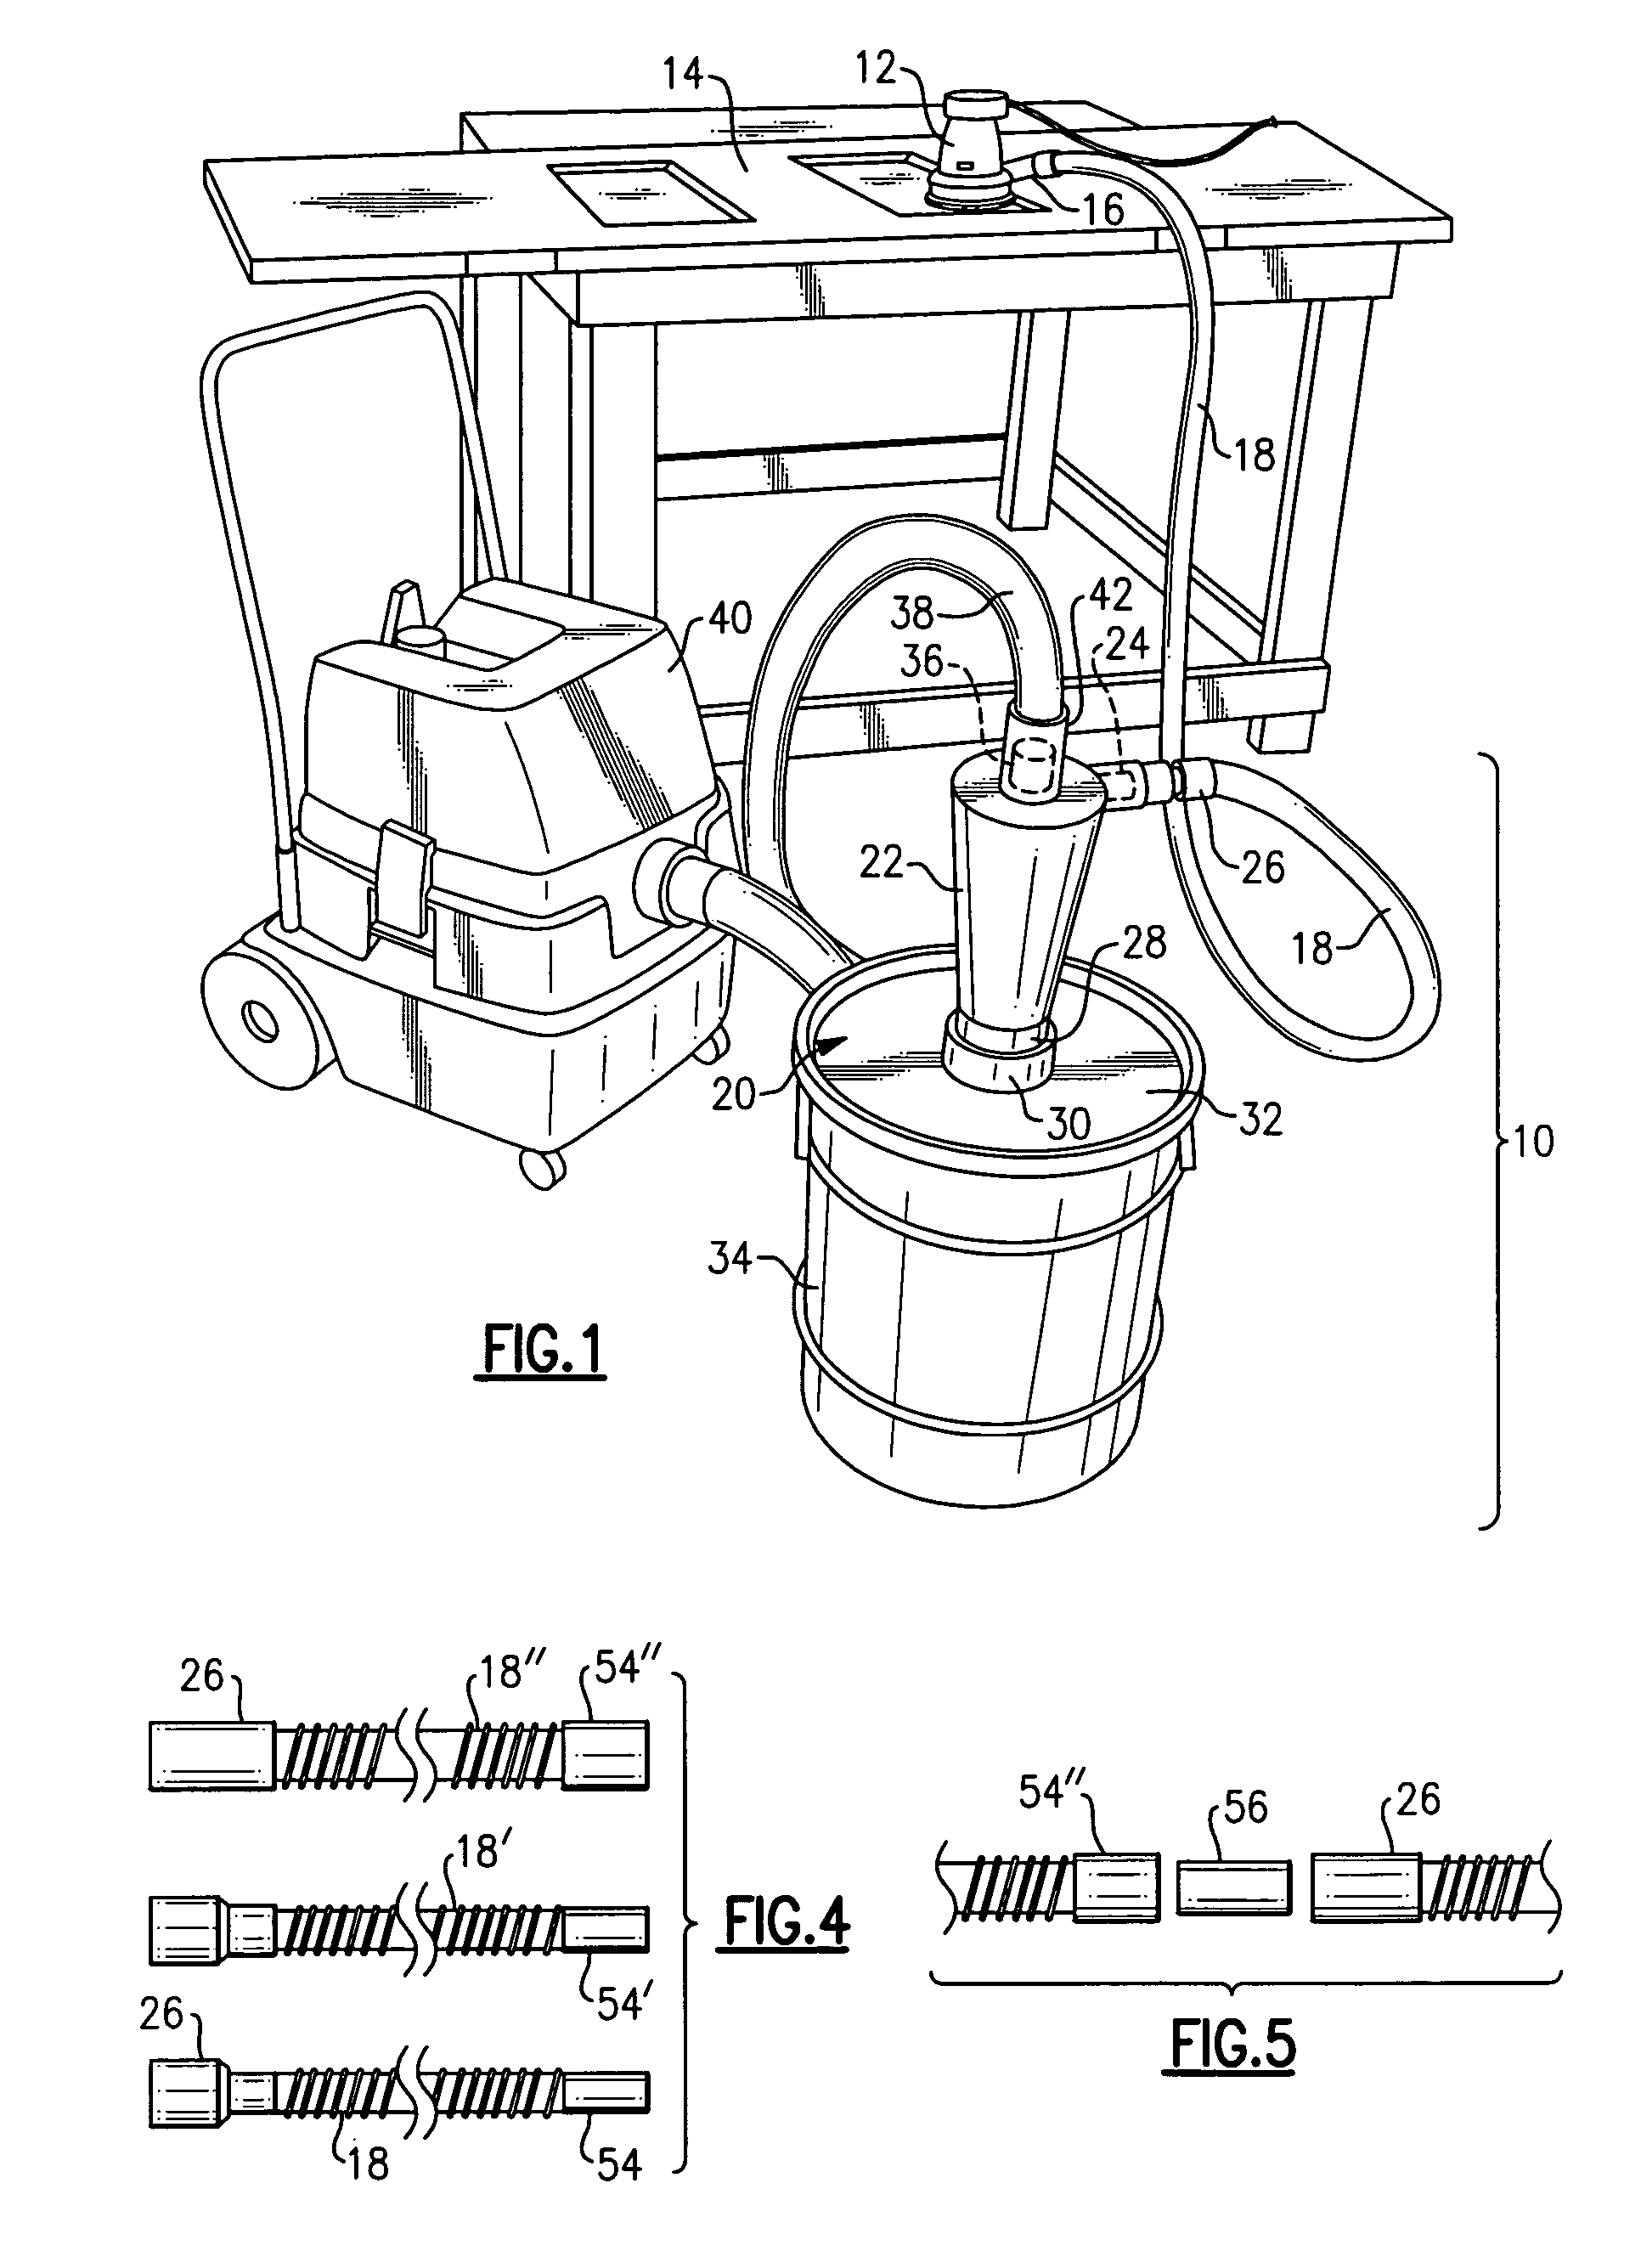 Auxiliary dust collection system